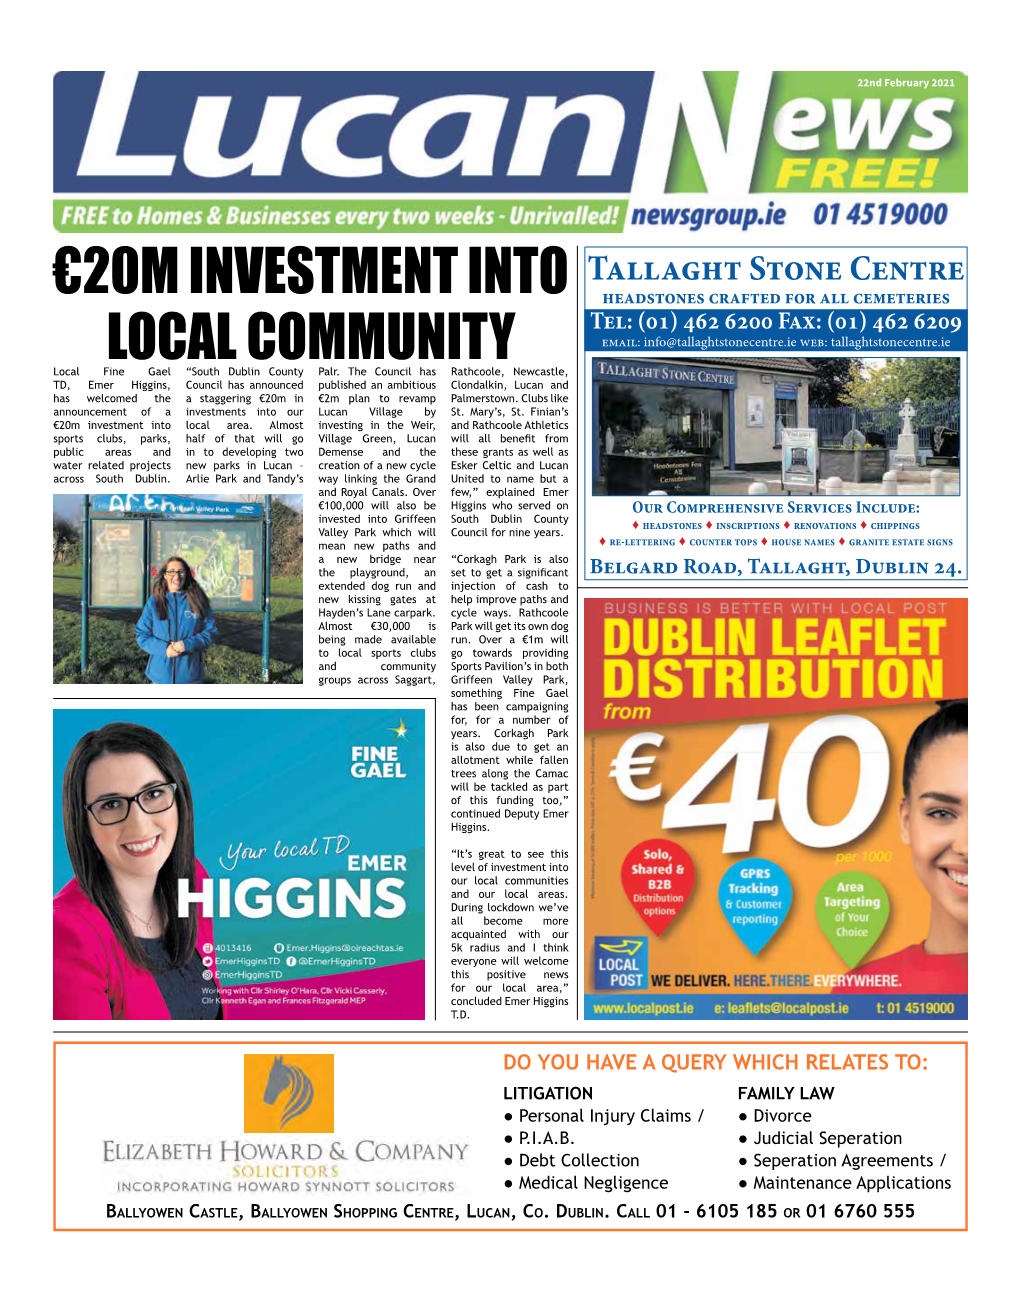 €20M Investment Into Local Community